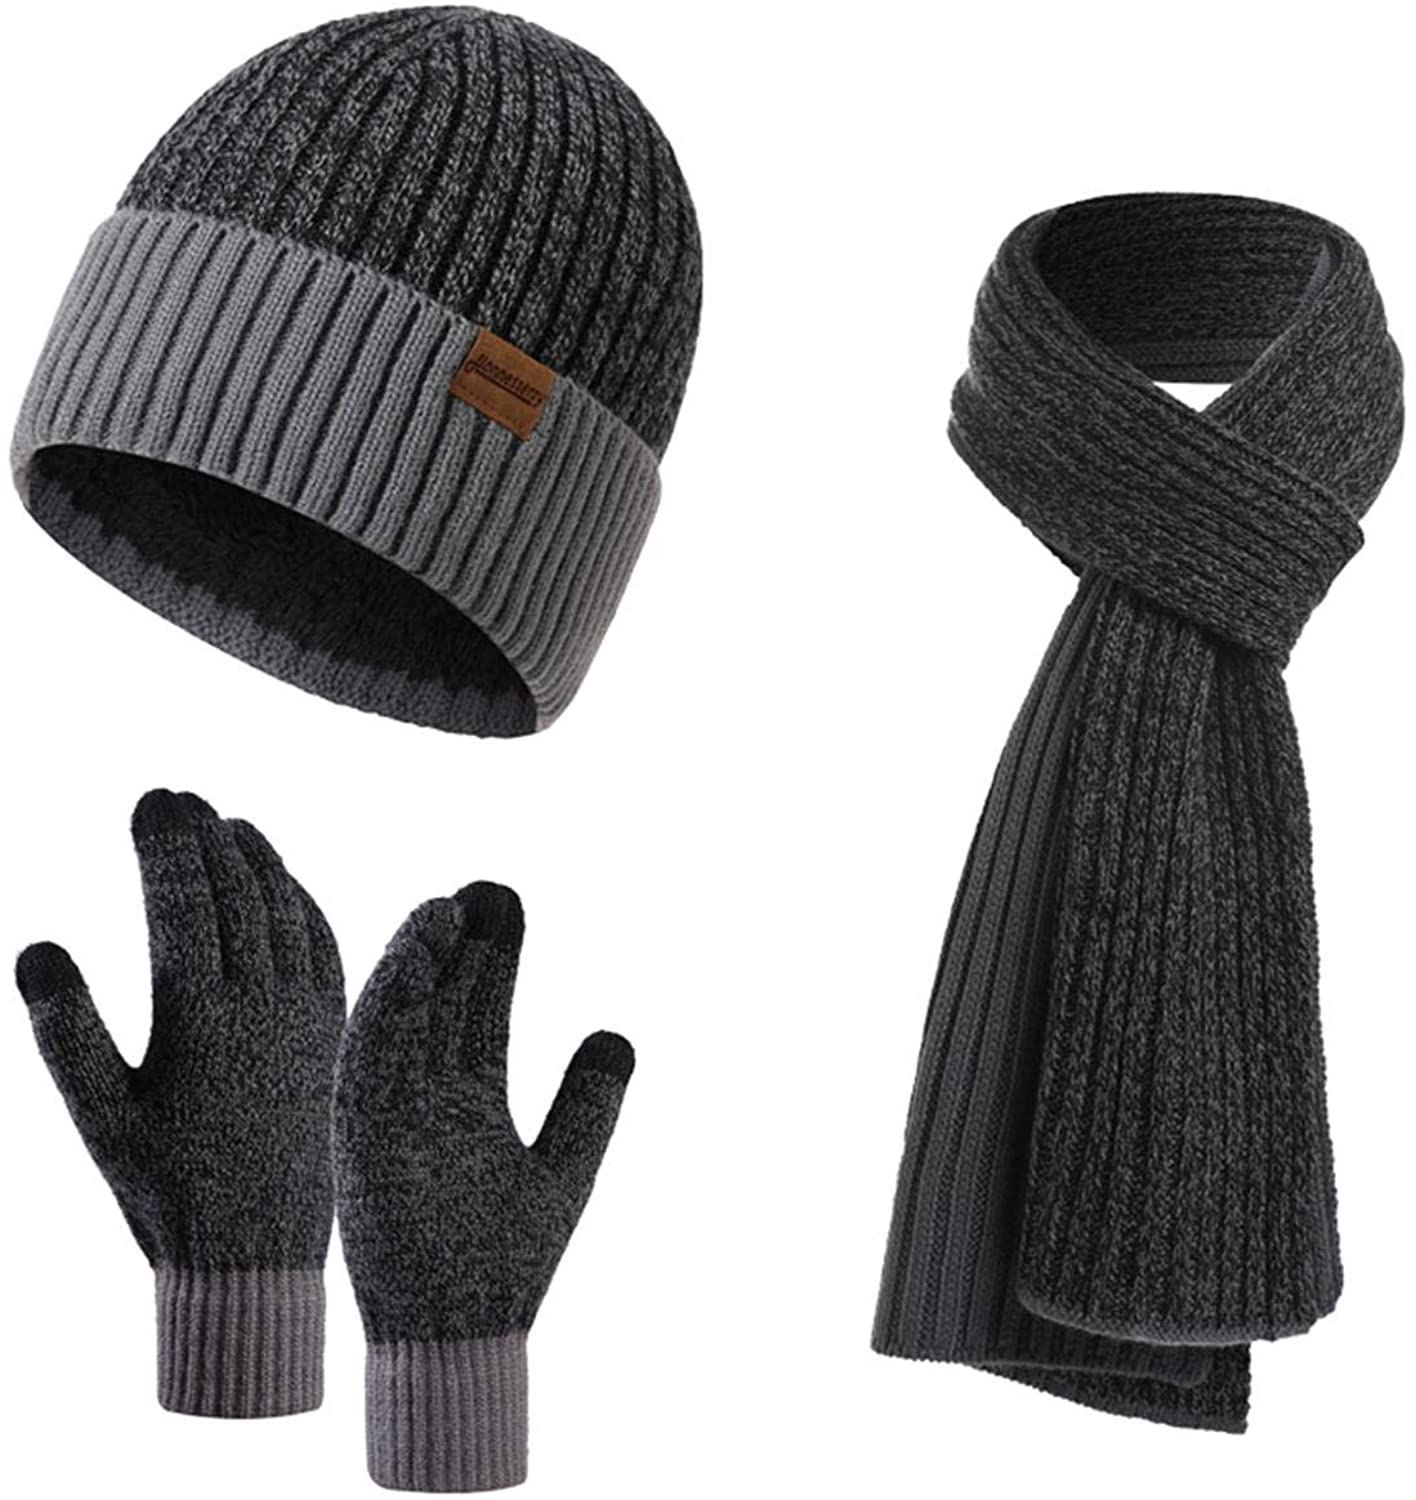 Honnesserry Men's Winter Beanie Hat Neck Warmer Scarf and Touchscreen ...